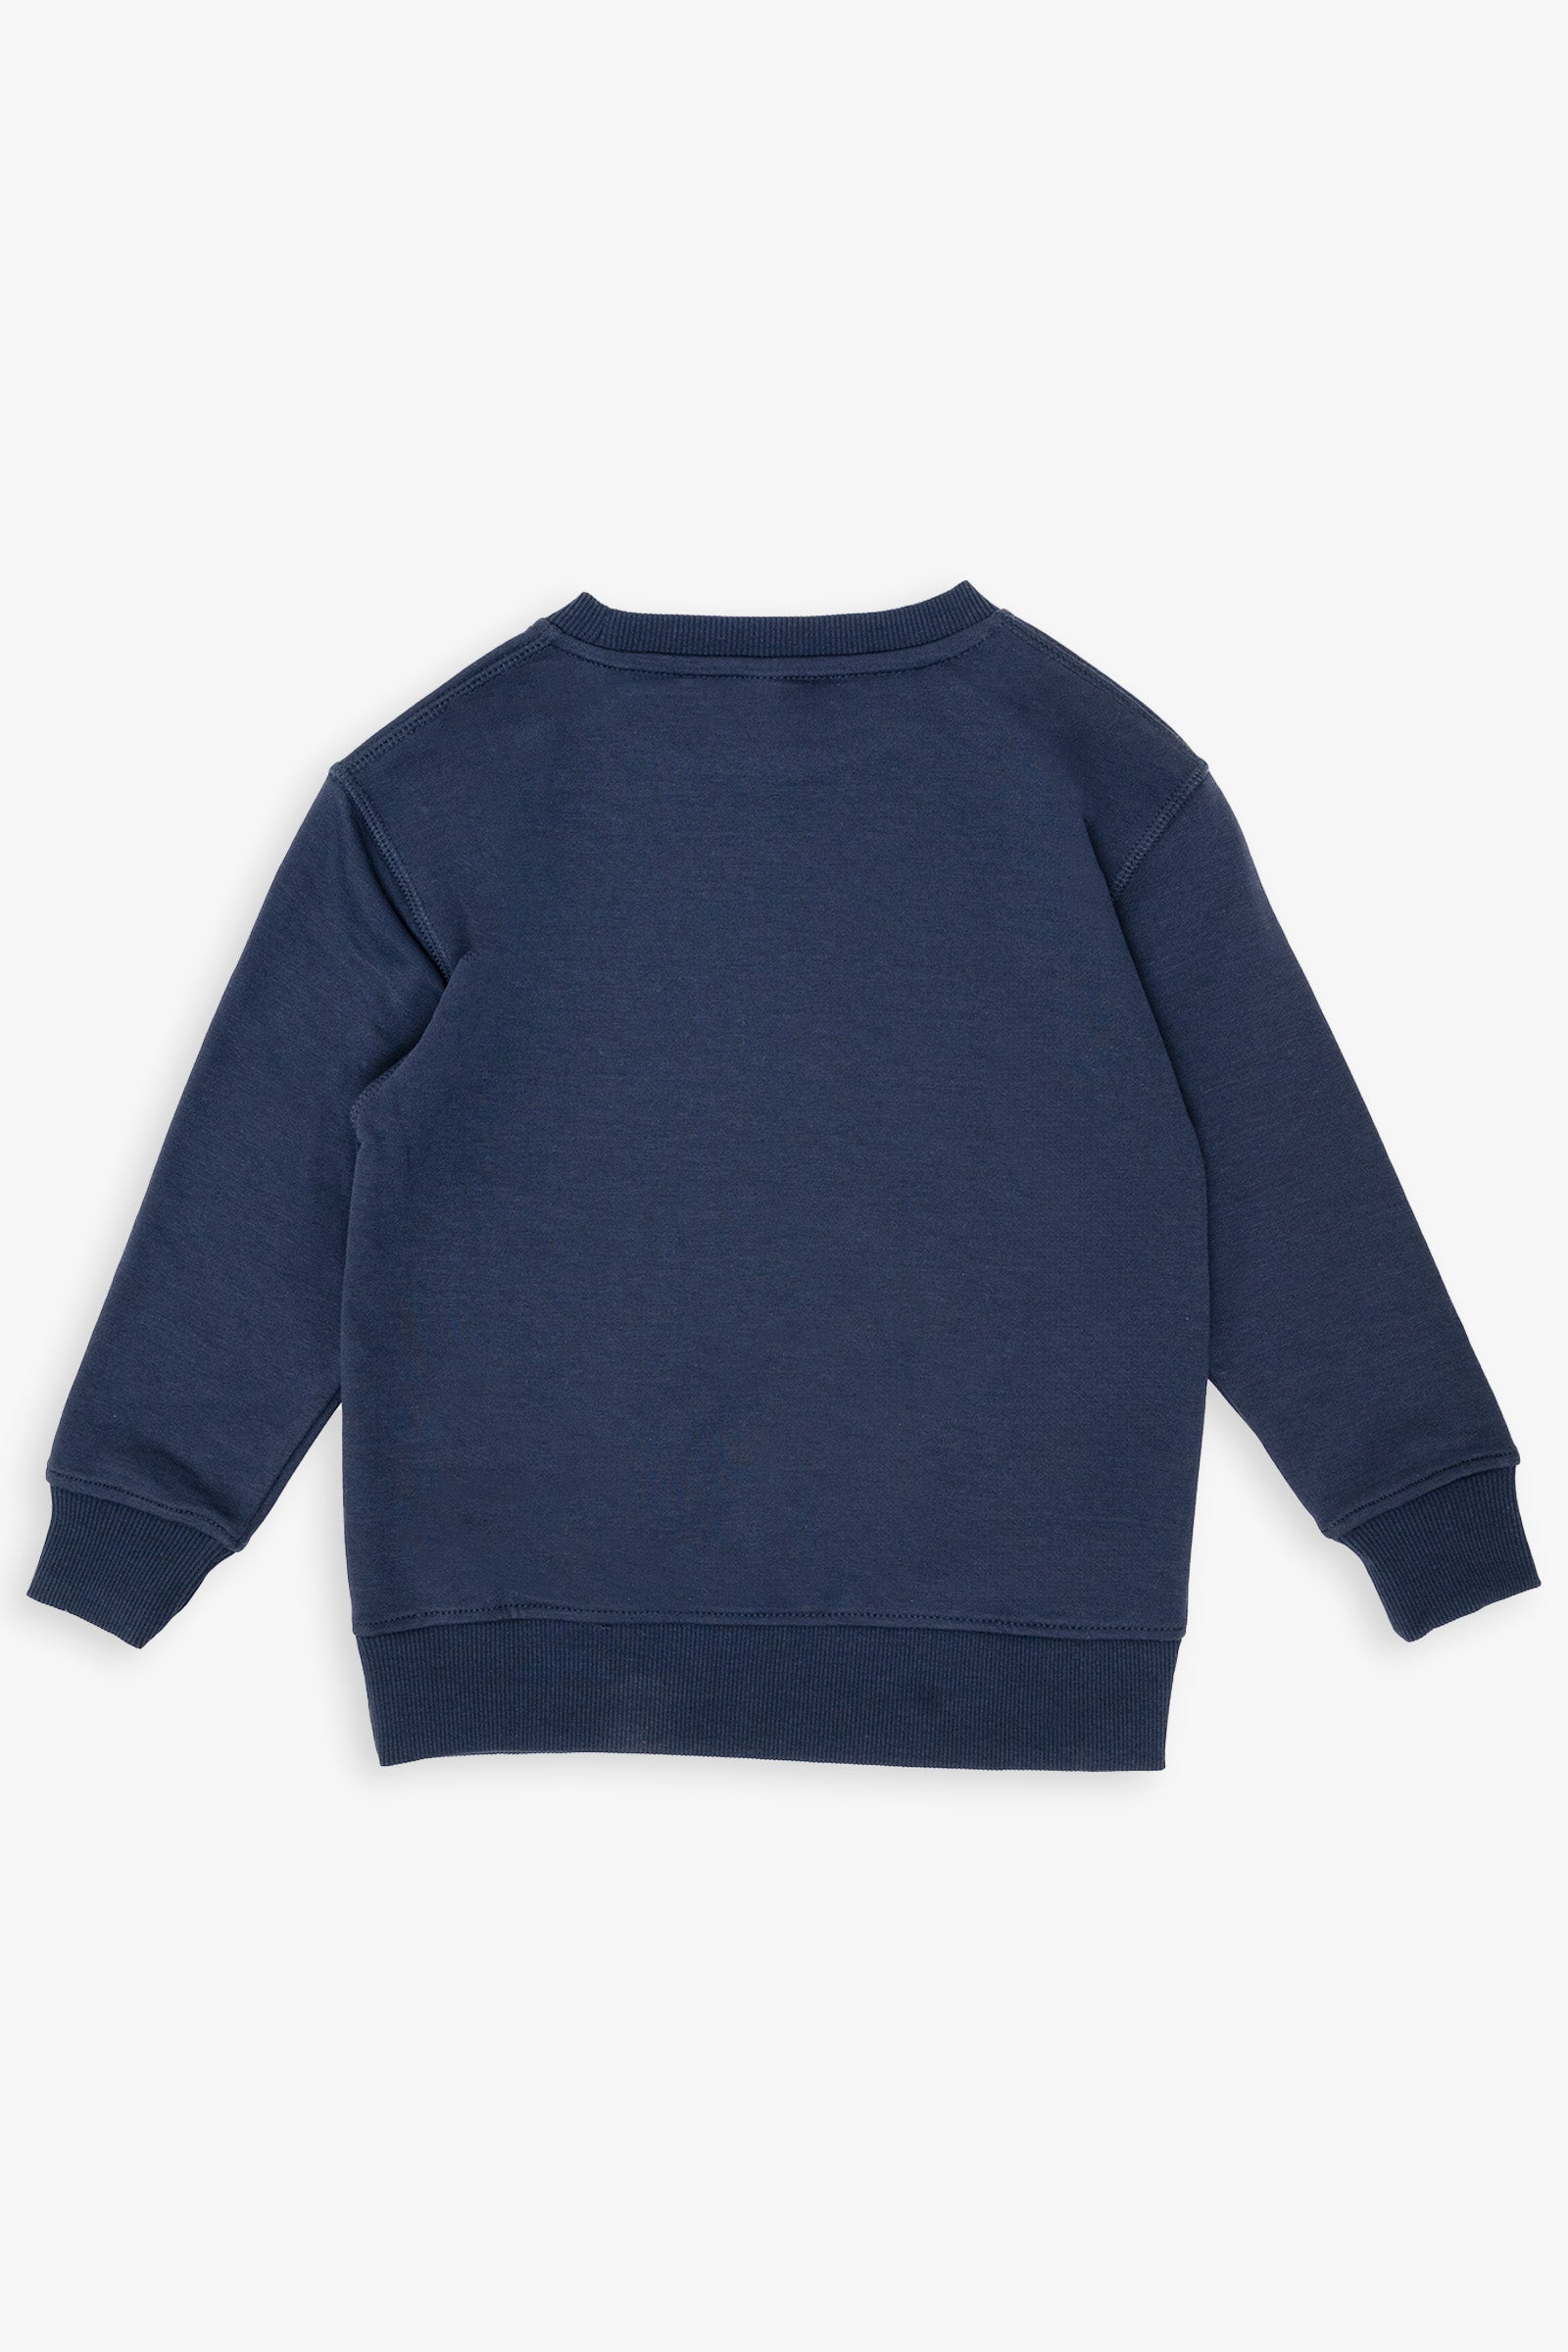 Youth Kids Unisex French Terry Cotton Crewneck